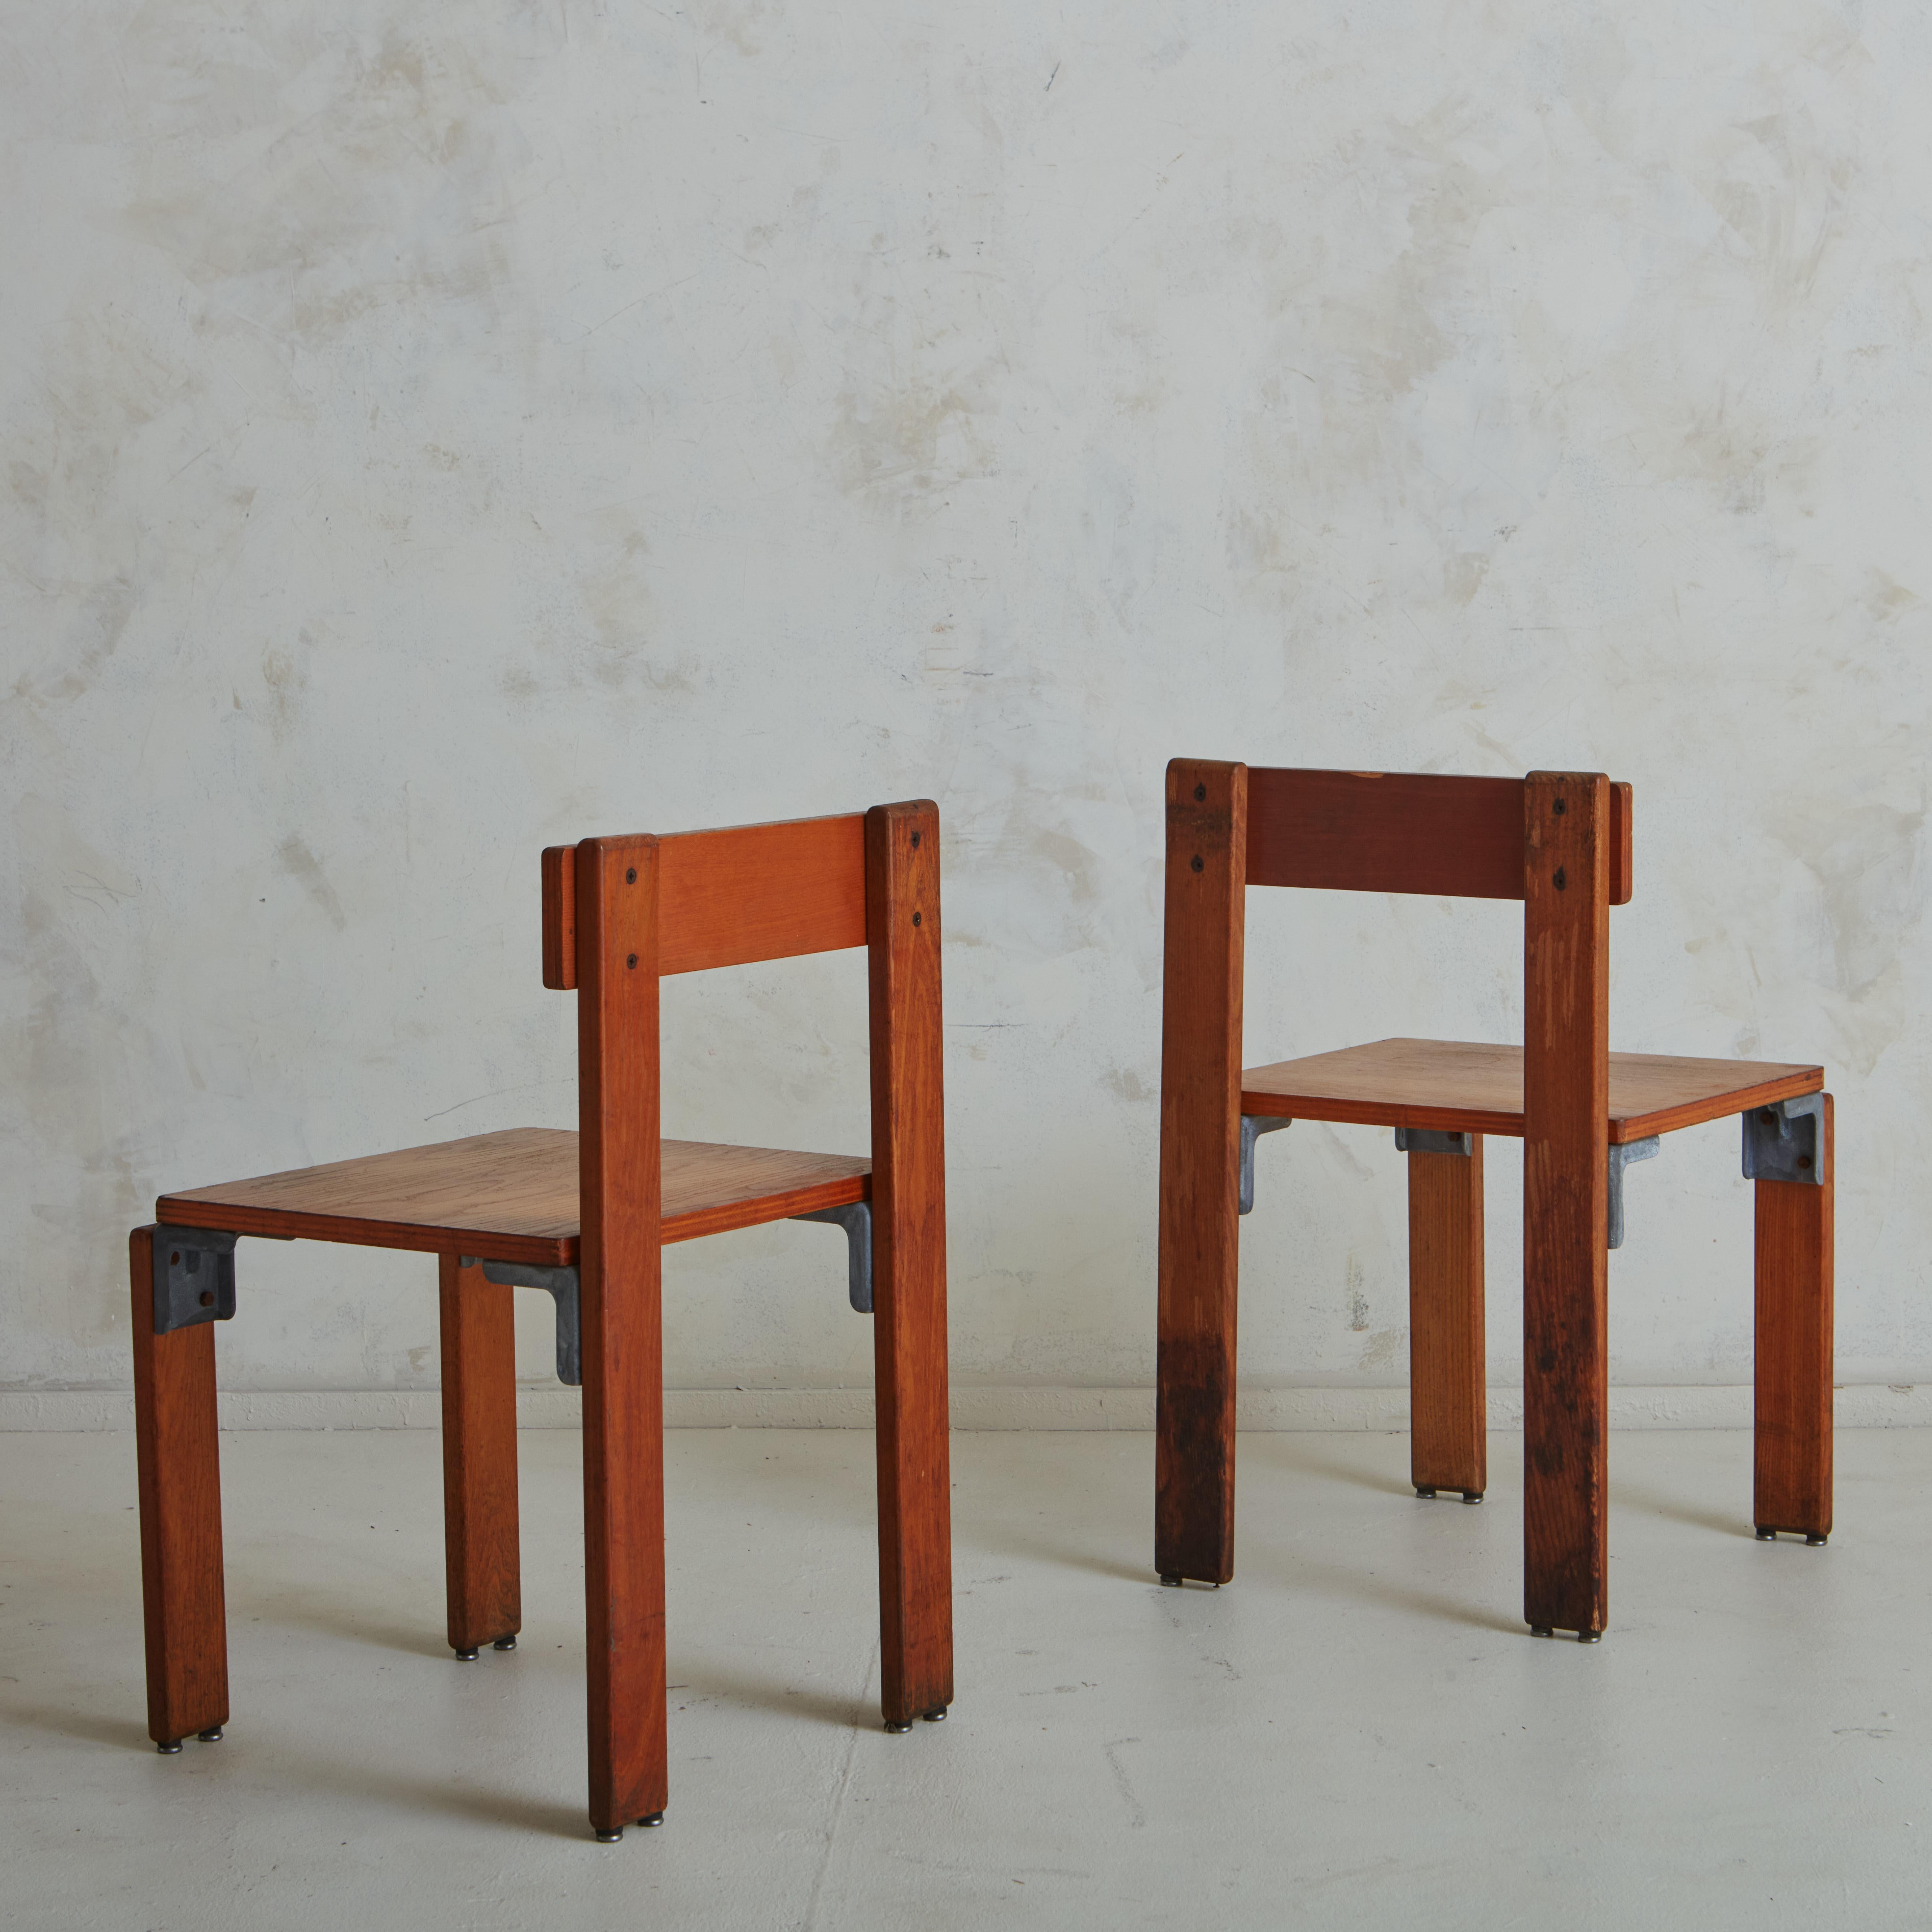 Pair of chairs designed by George Candilis and Finnish interior designer Anja Blomstedt for a set of holiday furniture that completes the design of the Carrats holiday village. The project by architects Georges Candilis (1913-1995), Georges